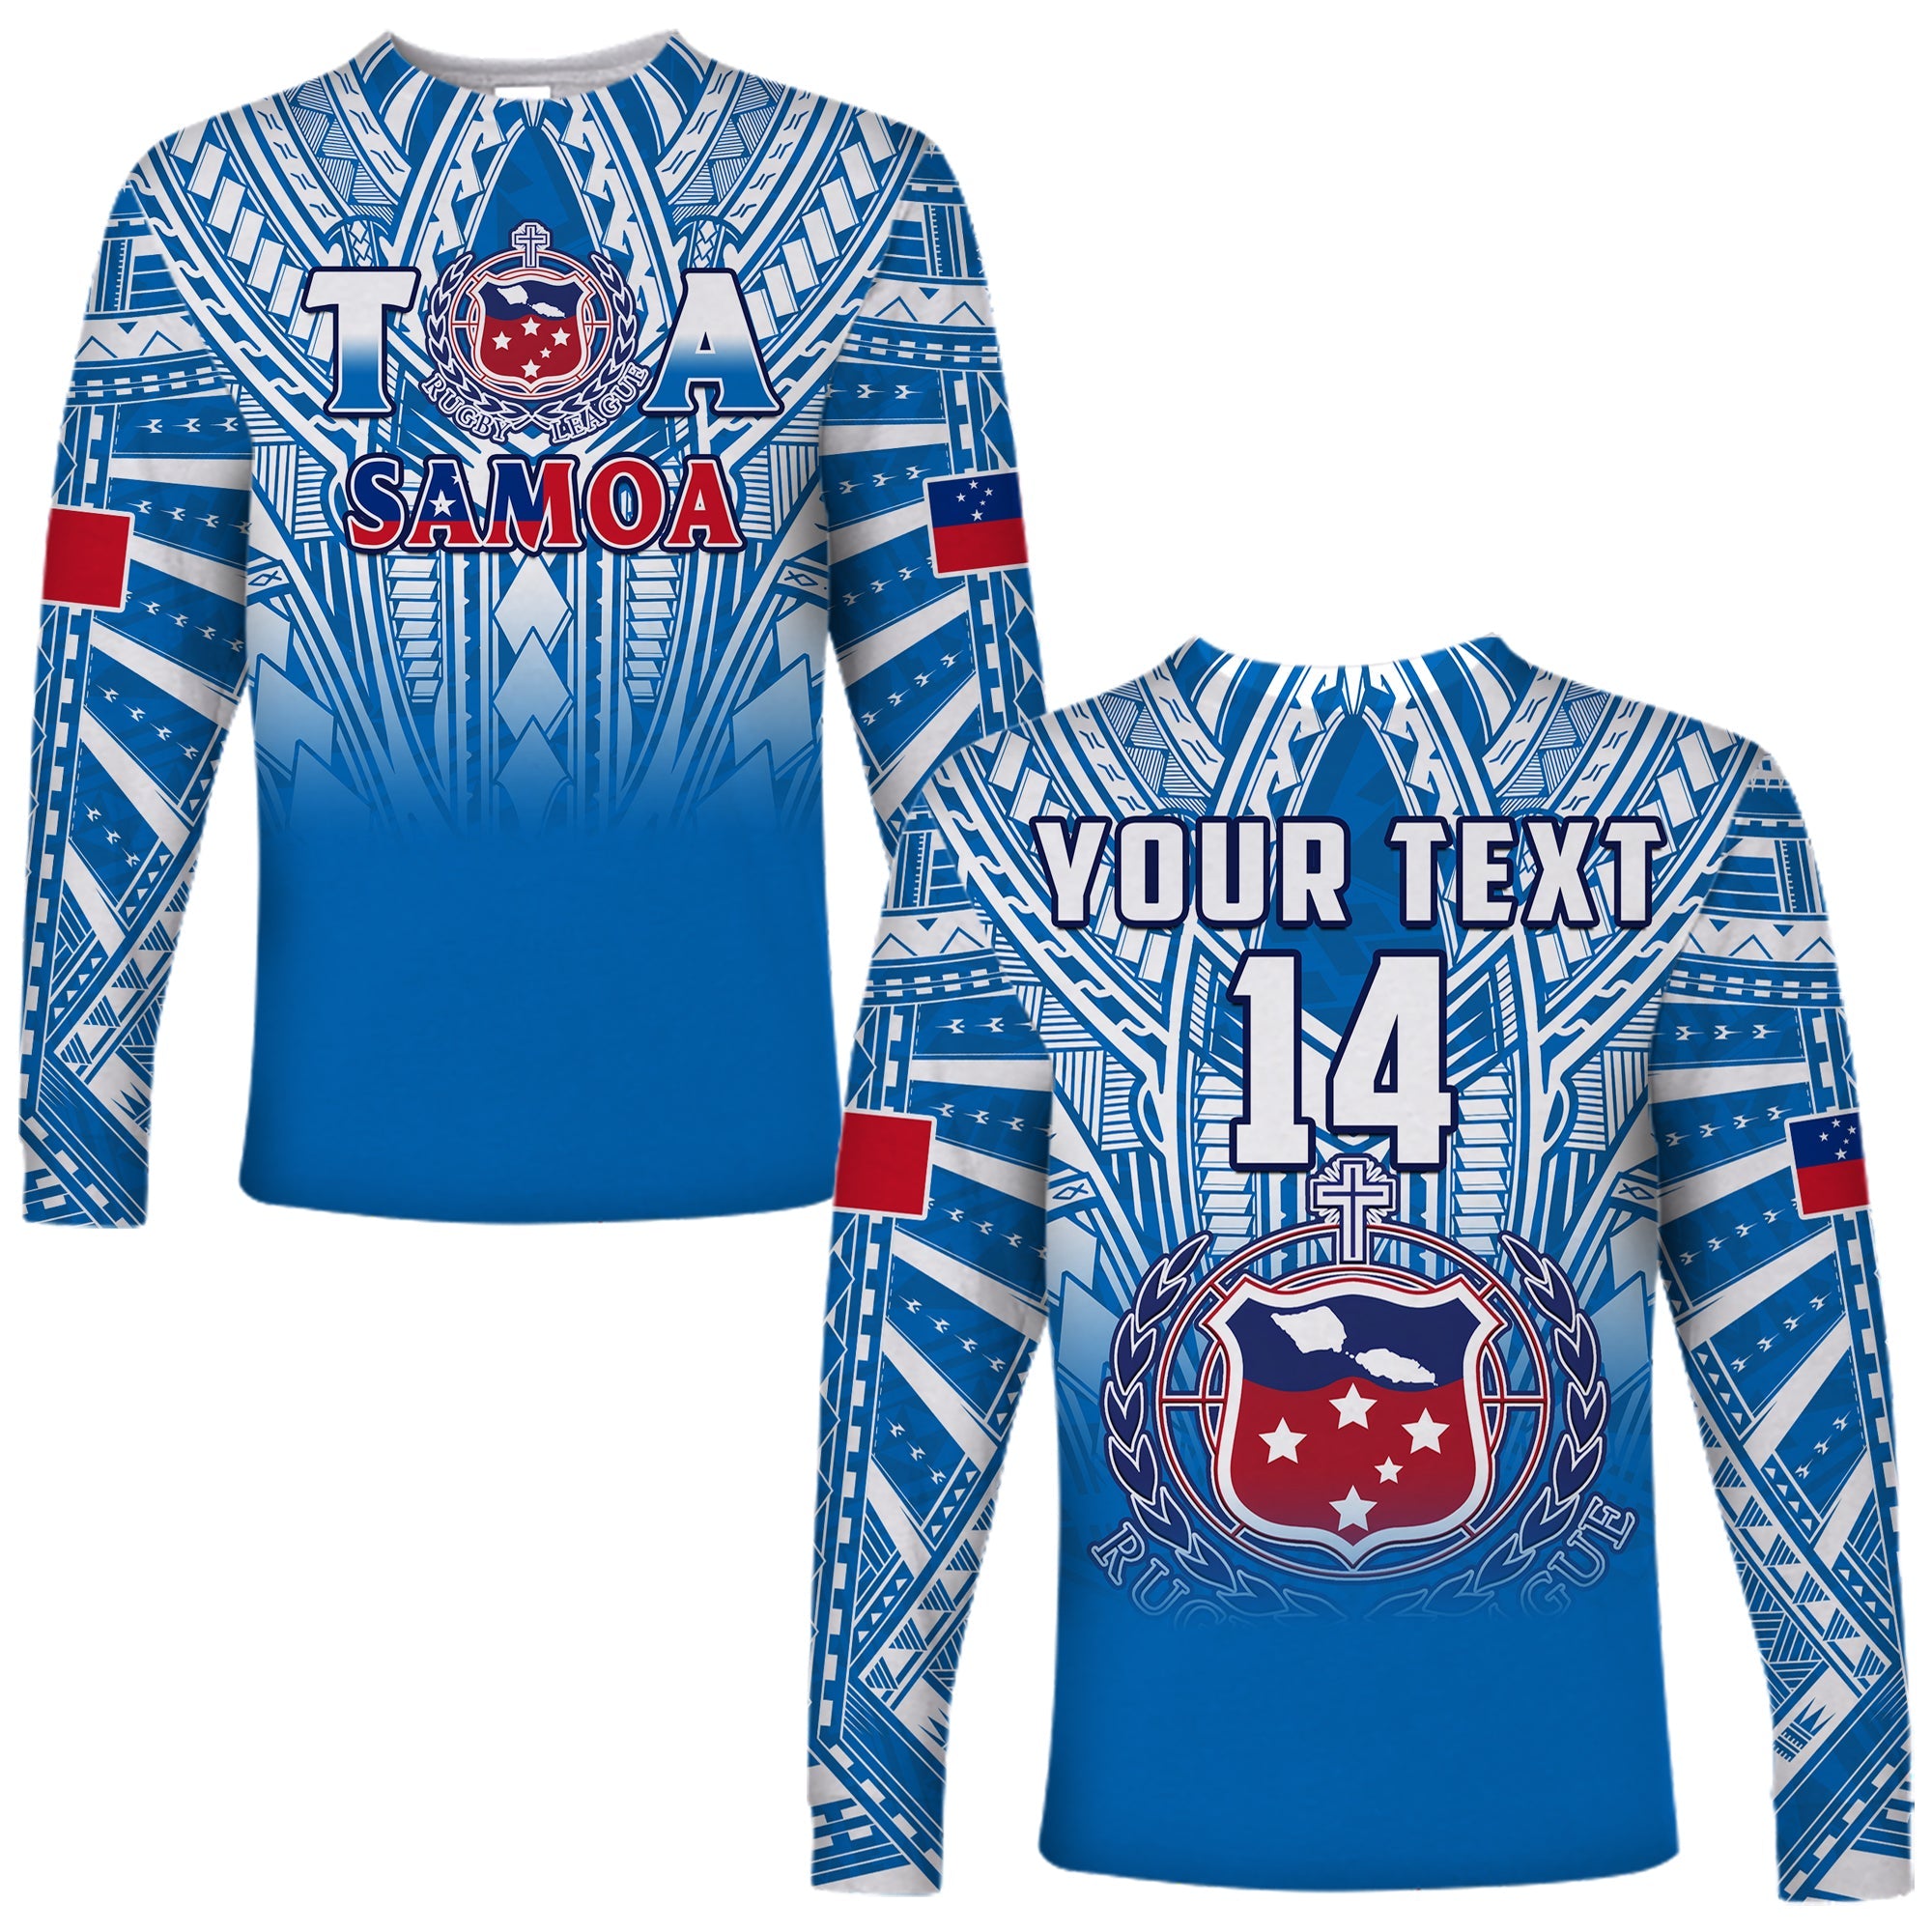 (Custom Text And Number) Samoa Rugby Long Sleeve Shirt Personalise Toa Samoa Polynesian Pacific Blue Version LT14 Unisex Blue - Polynesian Pride